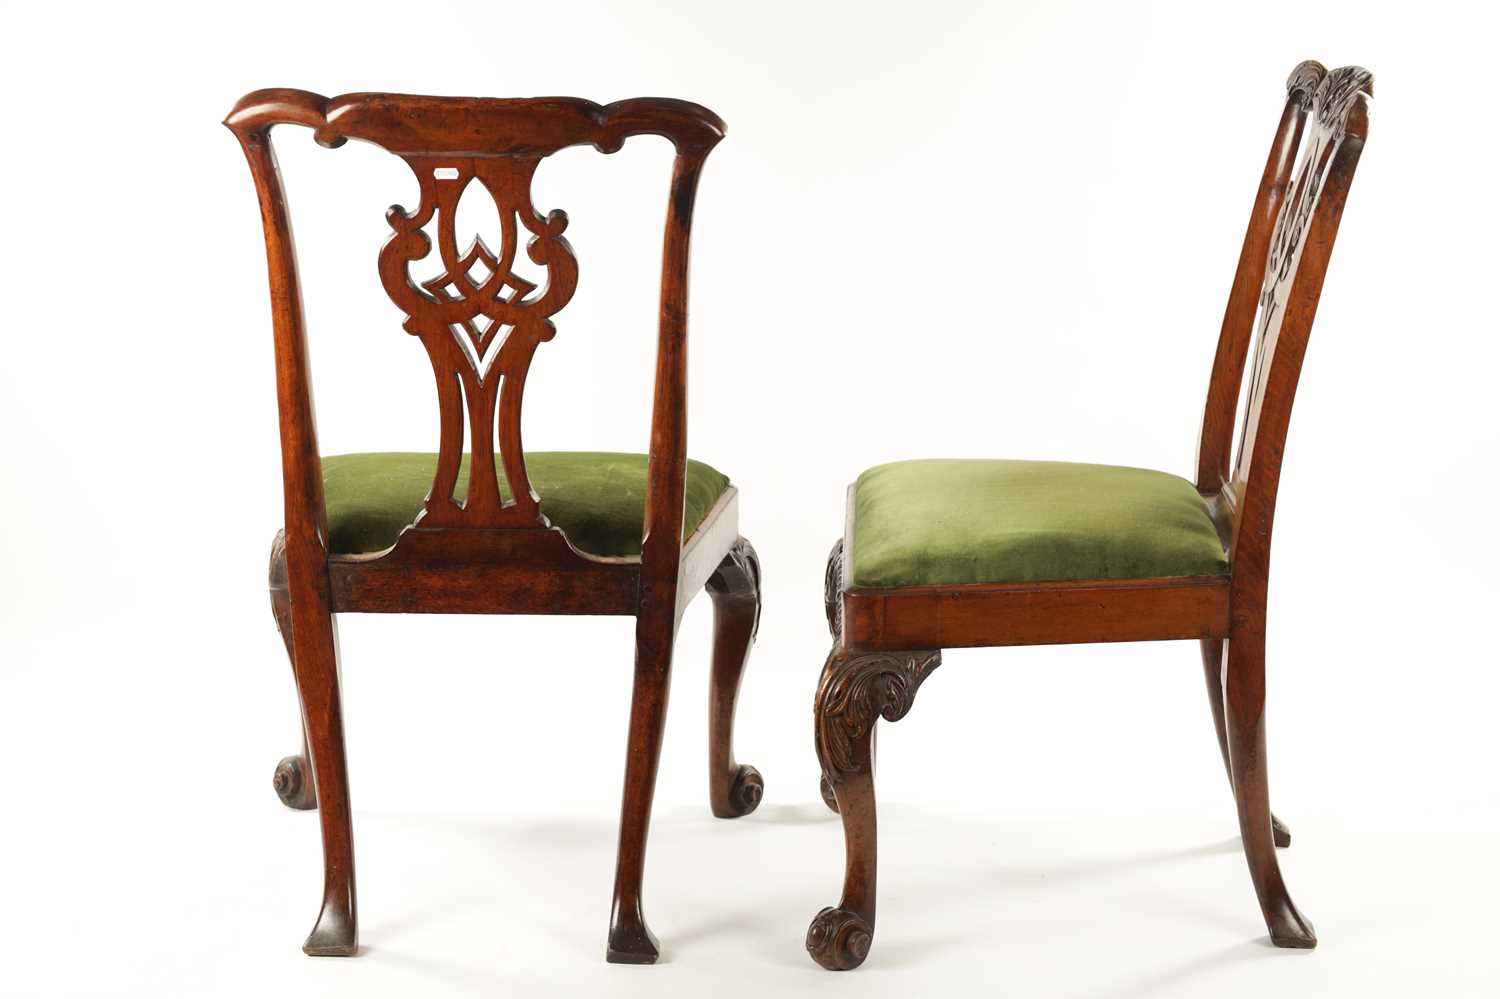 A GOOD PAIR OF MID 18TH CENTURY WALNUT SIDE CHAIRS - Image 8 of 10